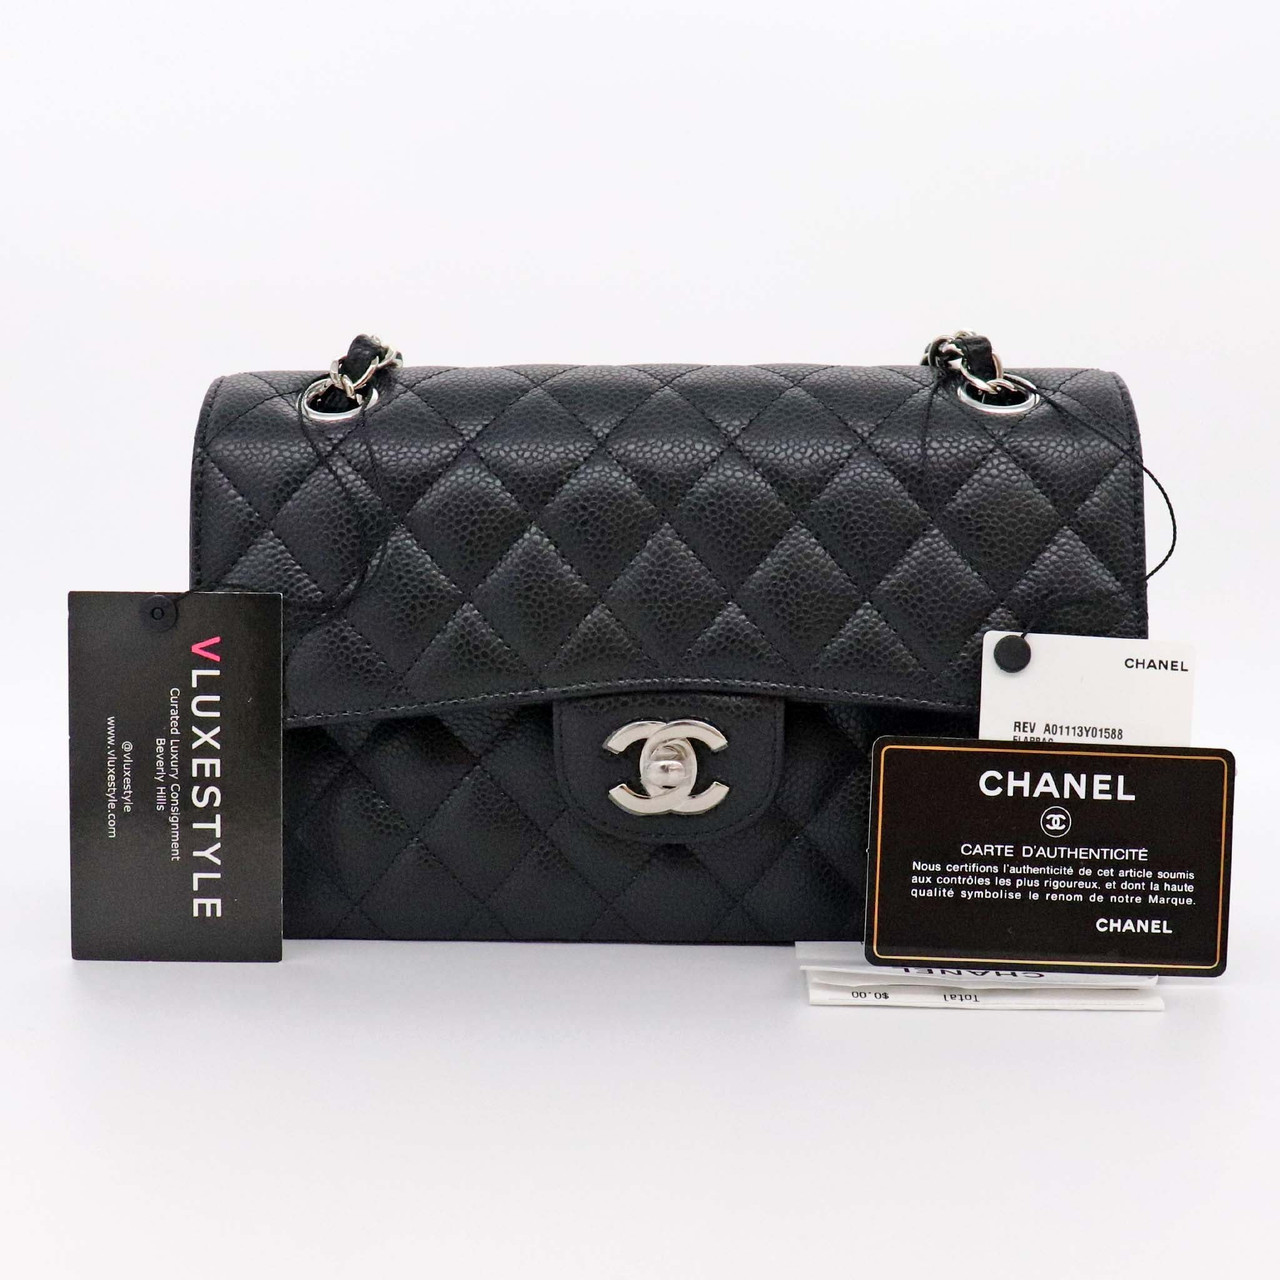 Chanel Black Quilted Caviar Small Classic Double Flap Bag